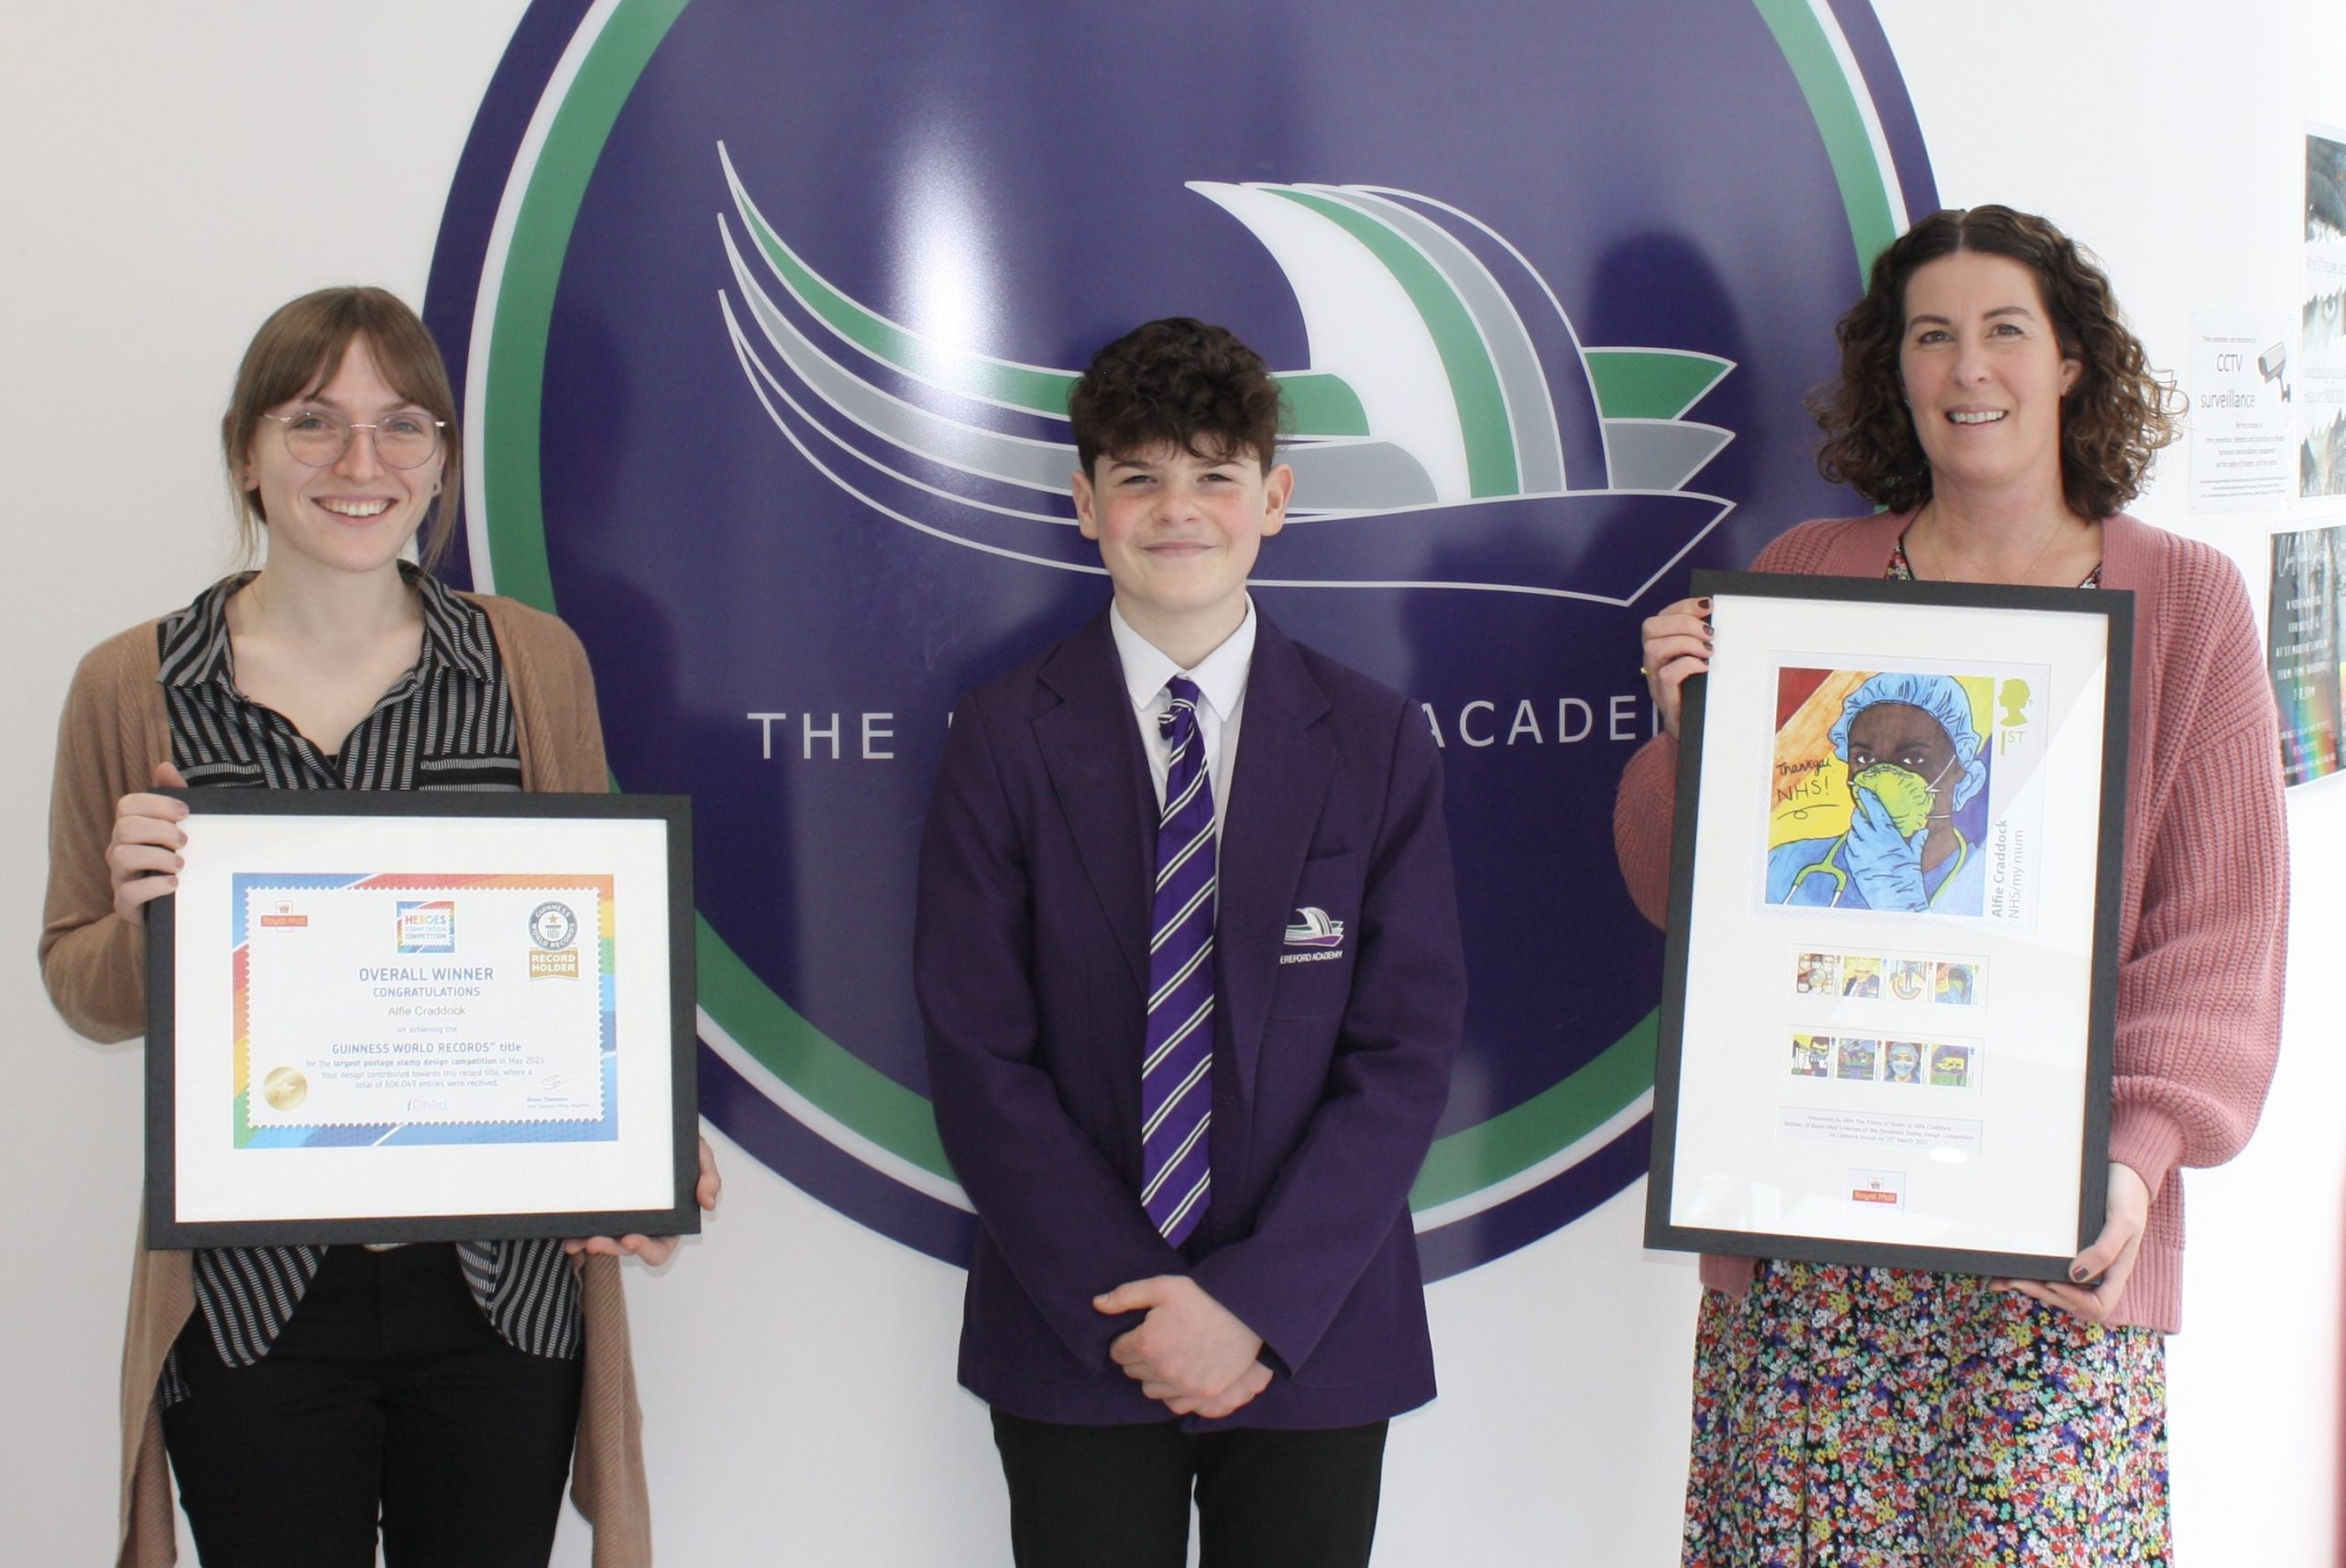 NEWS | Year 9 pupil at Hereford Academy is national winner of Royal Mail Stamp design competition